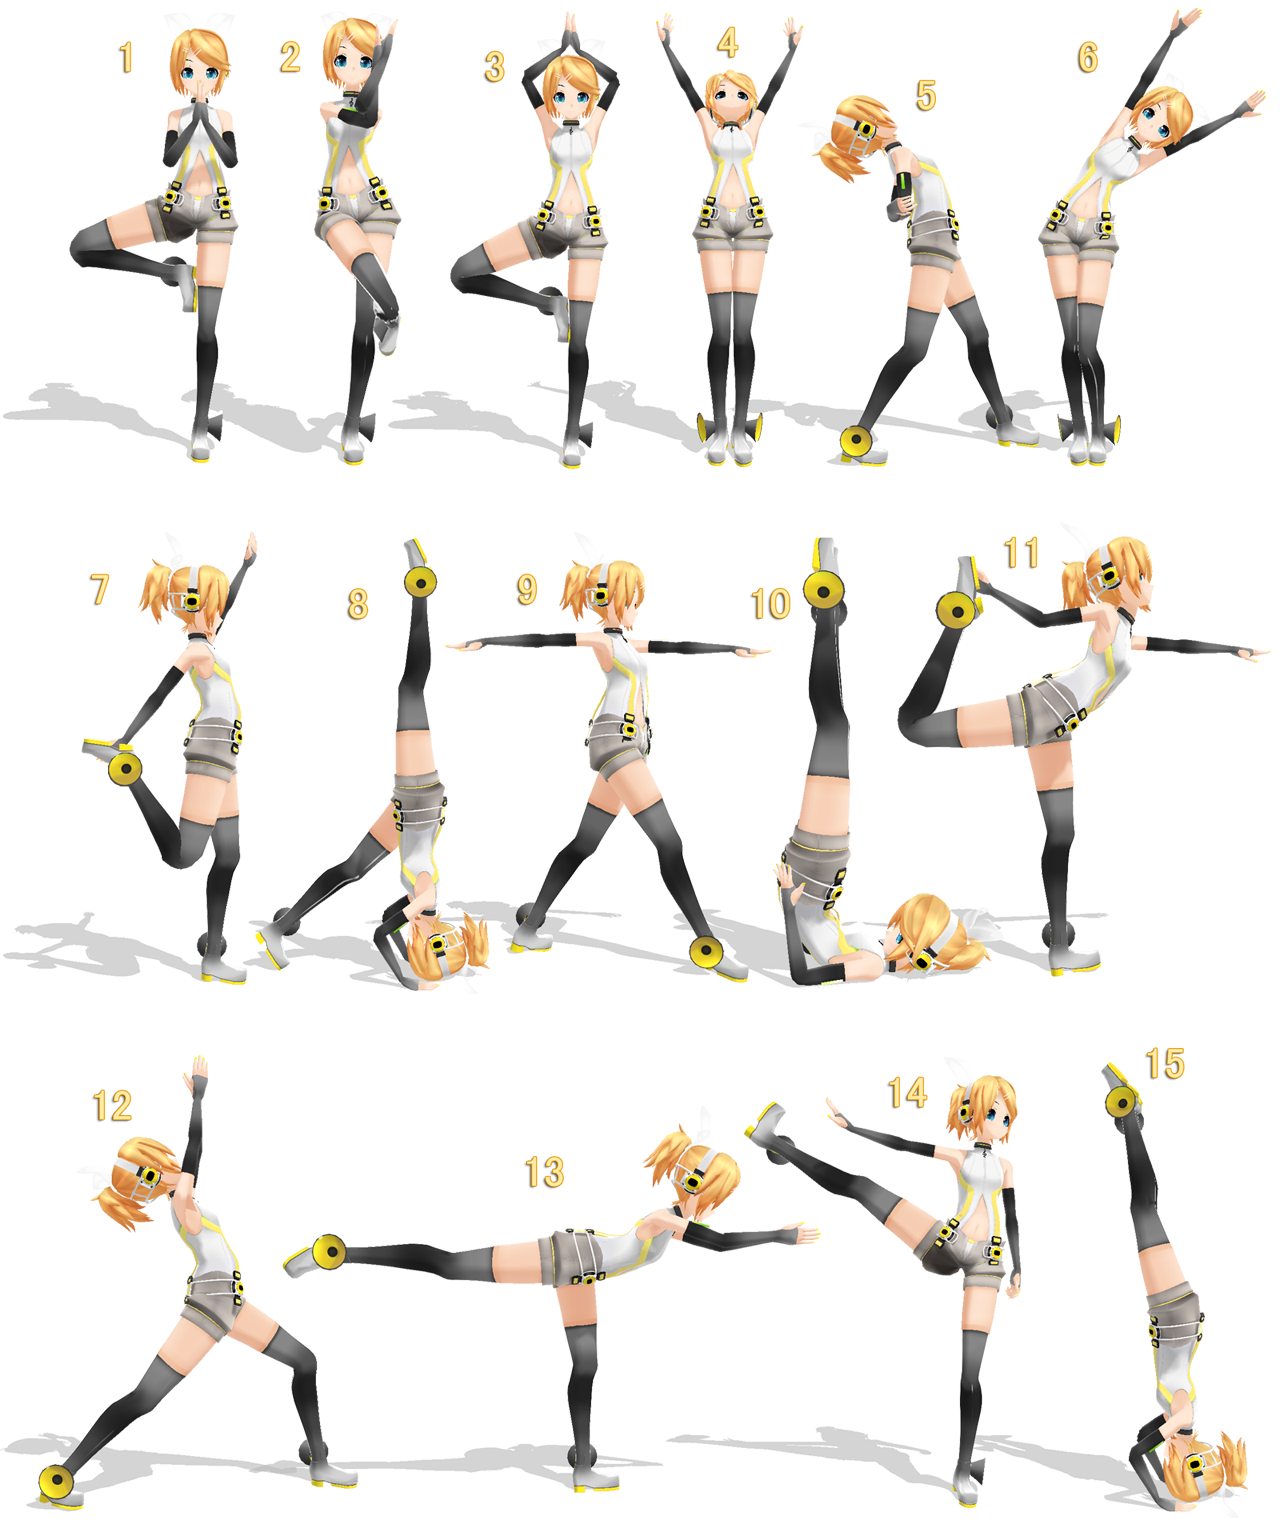 MMD Yoga Pose Pack - DL by Snorlaxin on DeviantArt. 